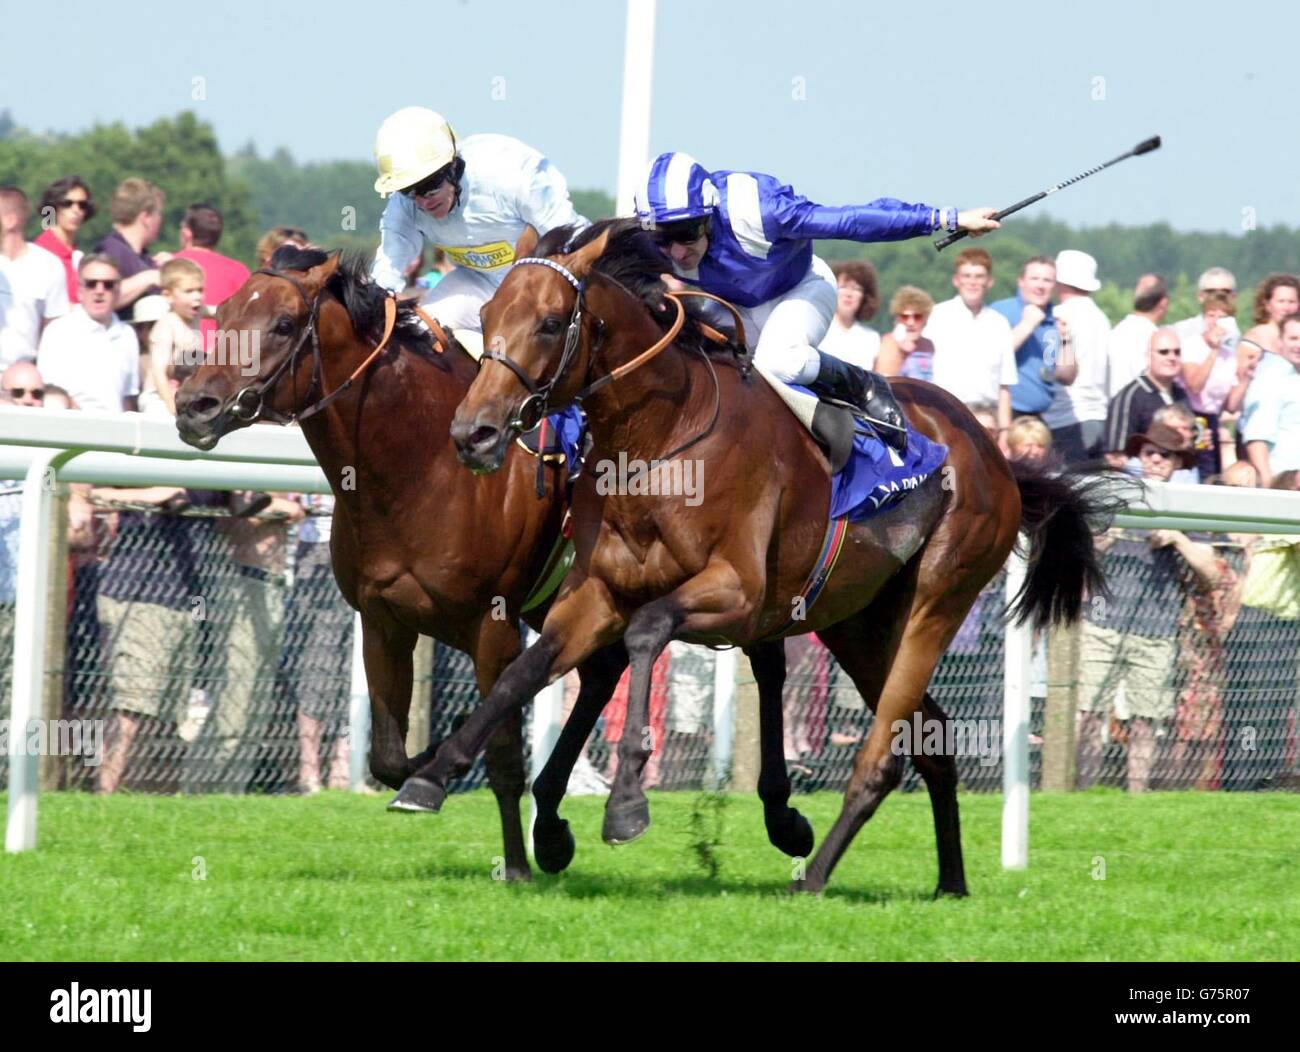 Golan, ridden Kieren Fallon up (left) beats Nayef ridden by Richard Hills to win The King George V1 and Queen Elizabeth Diamond Stakes at Ascot. Stock Photo